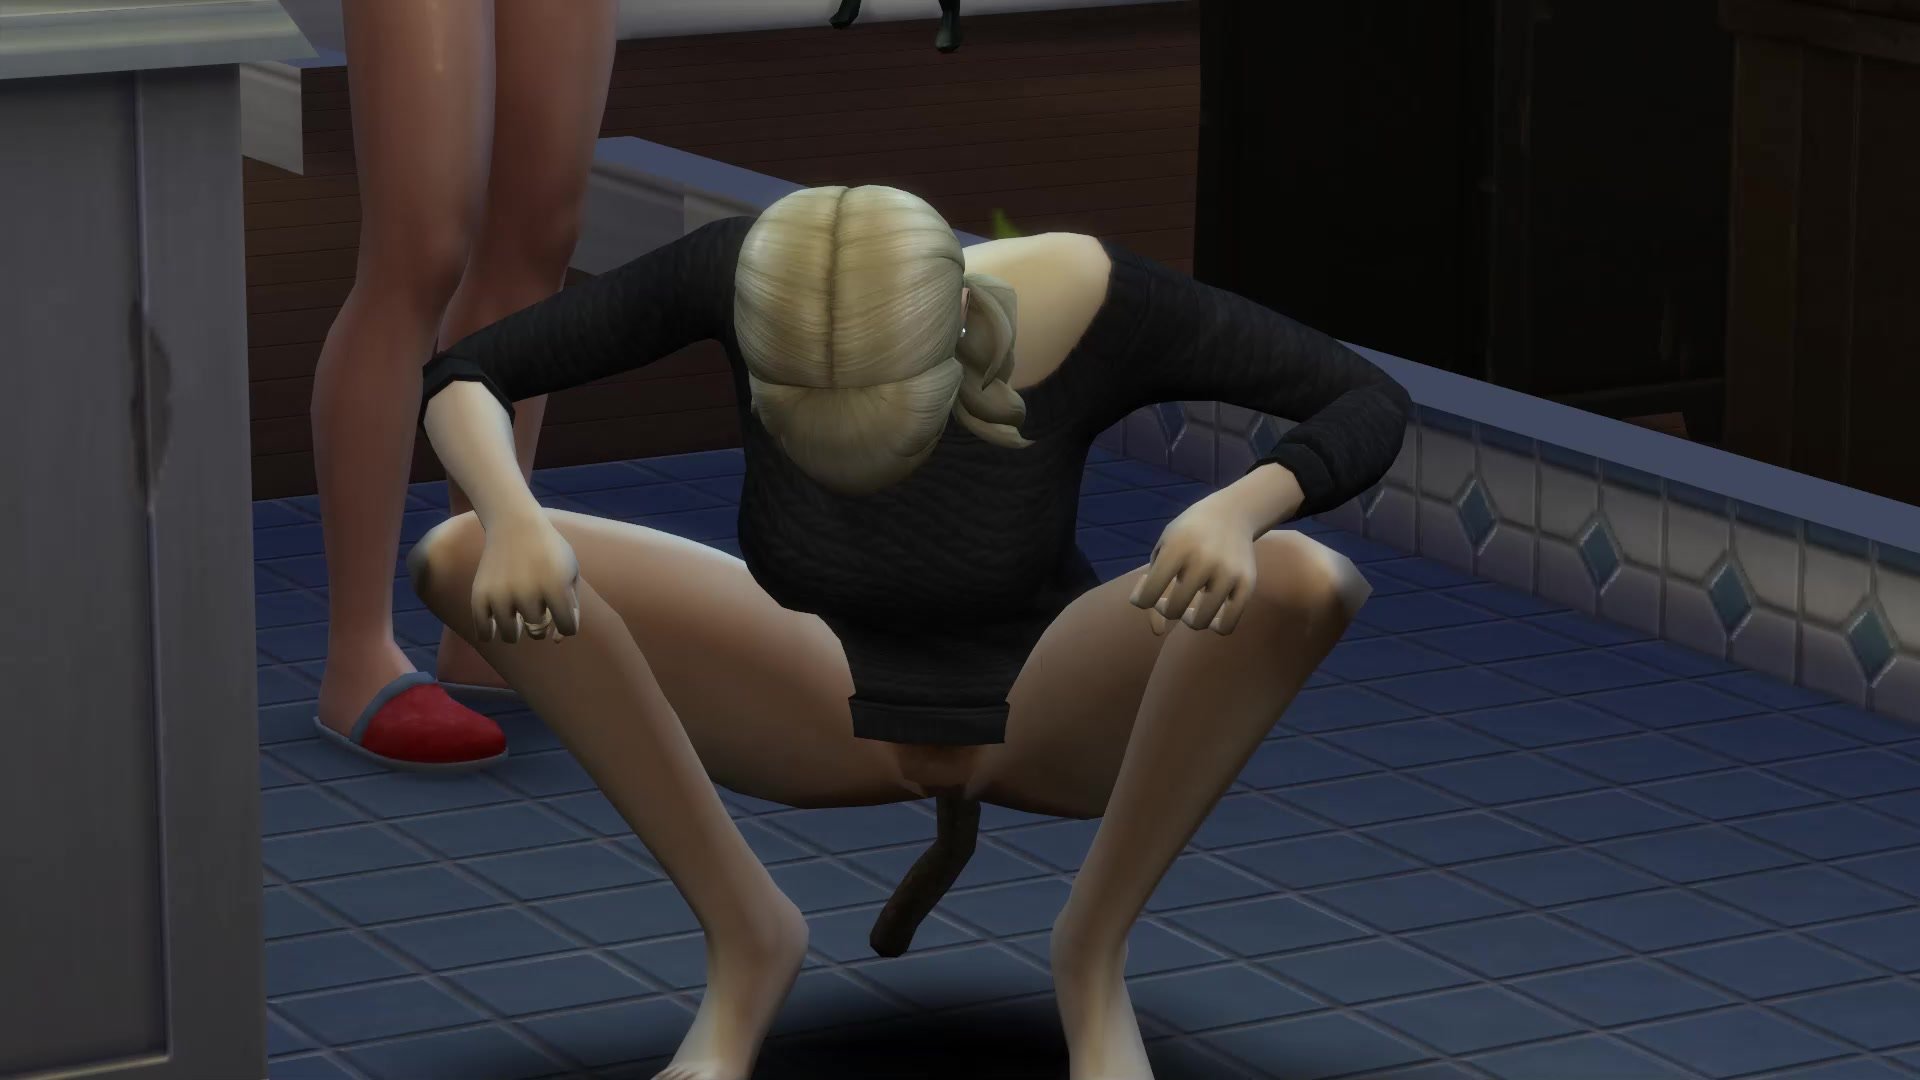 The sims 4 quick floor shitting